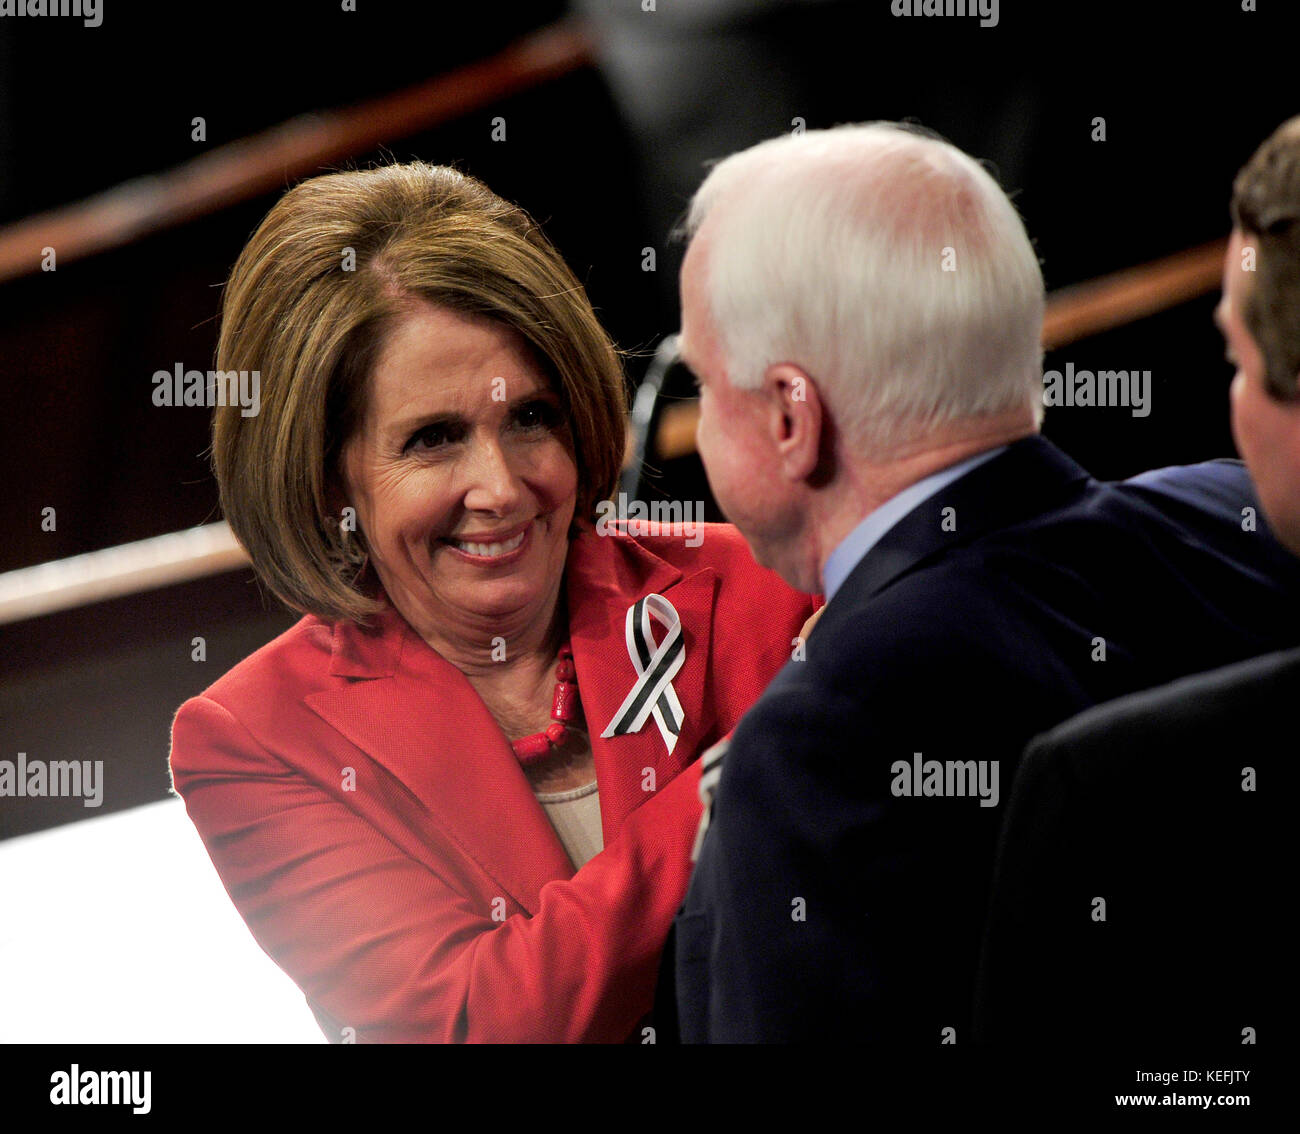 United States House Democratic Leader Nancy Pelosi (Democrat of California), left, greets U.S. Senator John McCain (Republican of Arizona), right, following U.S. President Barack Obama's State of the Union Address to a Joint Session of Congress in the U.S. Capitol in Washington, D.C. on Tuesday, January 25, 2011..Credit: Ron Sachs / CNP.(RESTRICTION: NO New York or New Jersey Newspapers or newspapers within a 75 mile radius of New York City) /MediaPunch Stock Photo